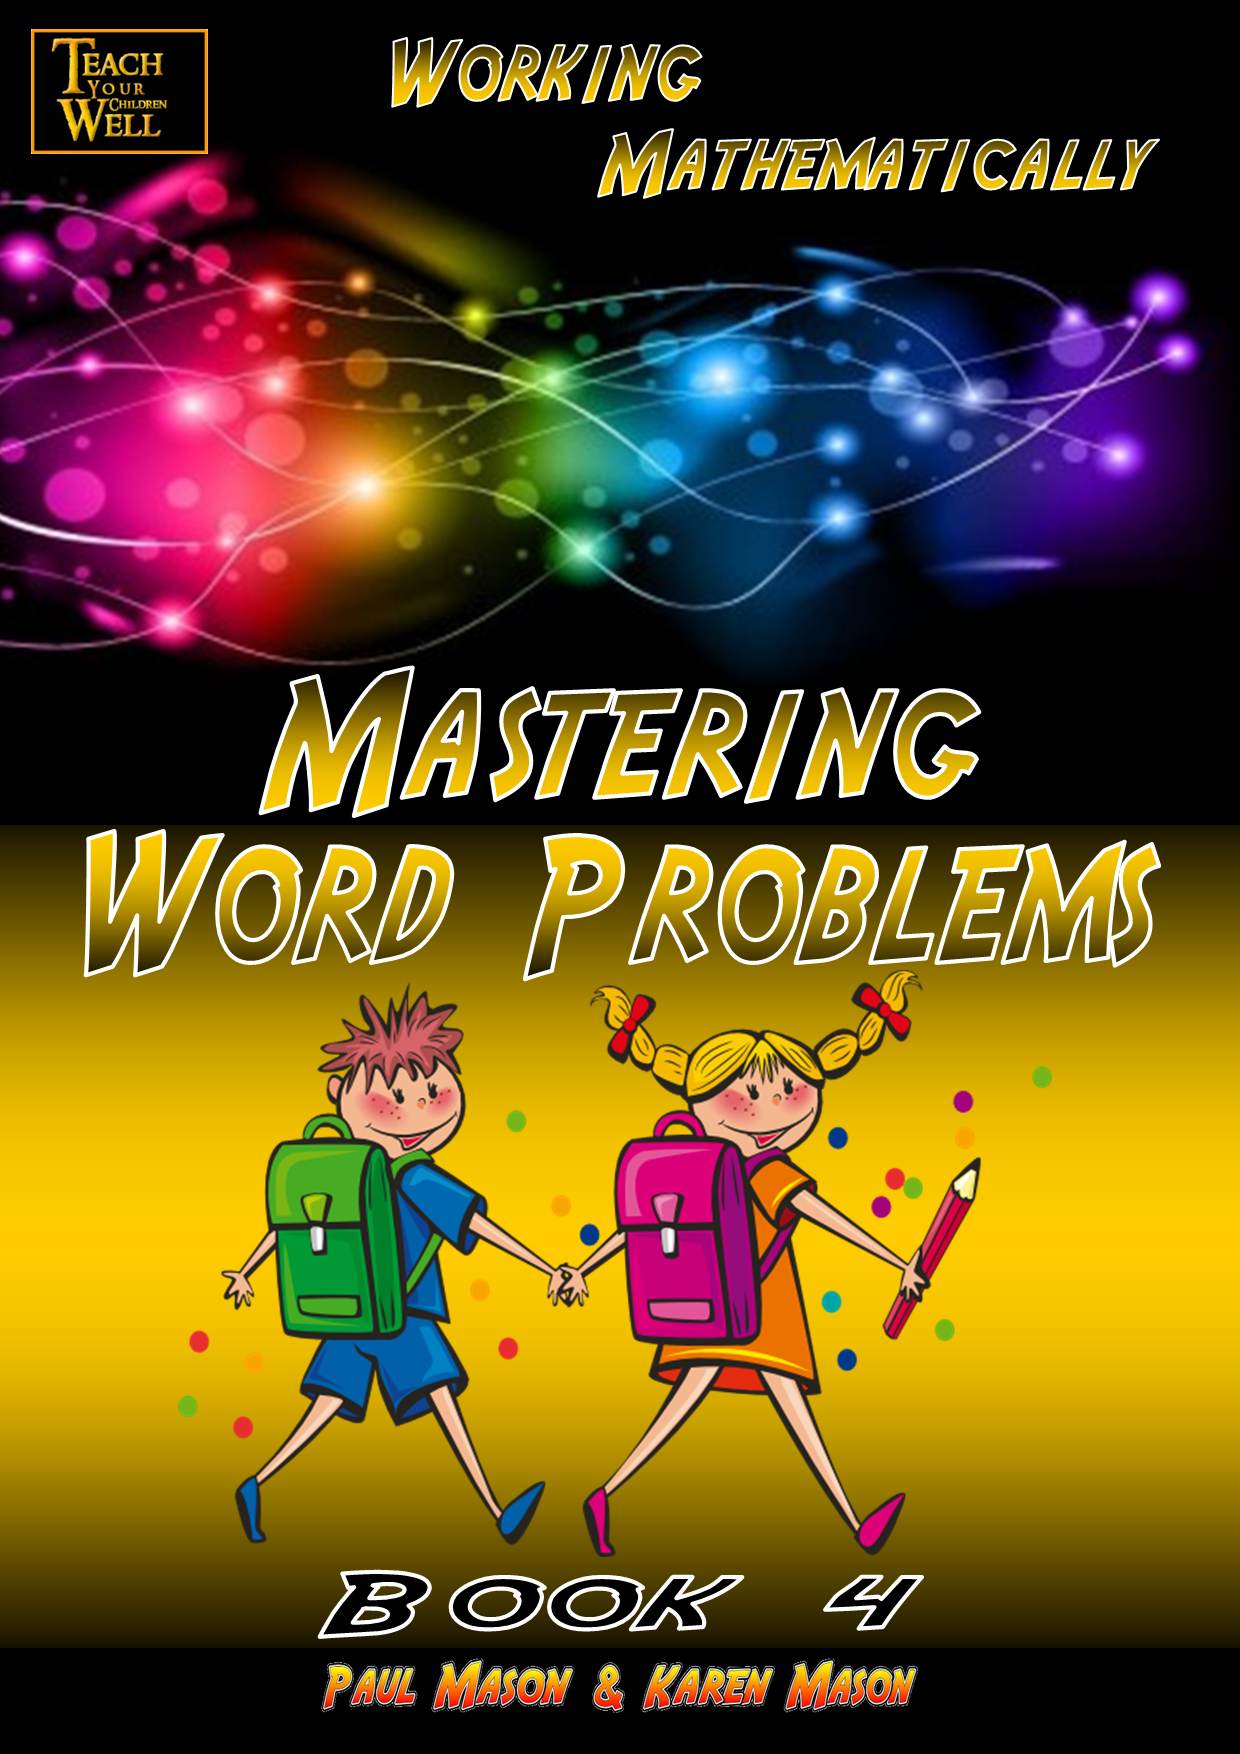 MASTERING WORD PROBLEMS 4 - 260 Word Problems